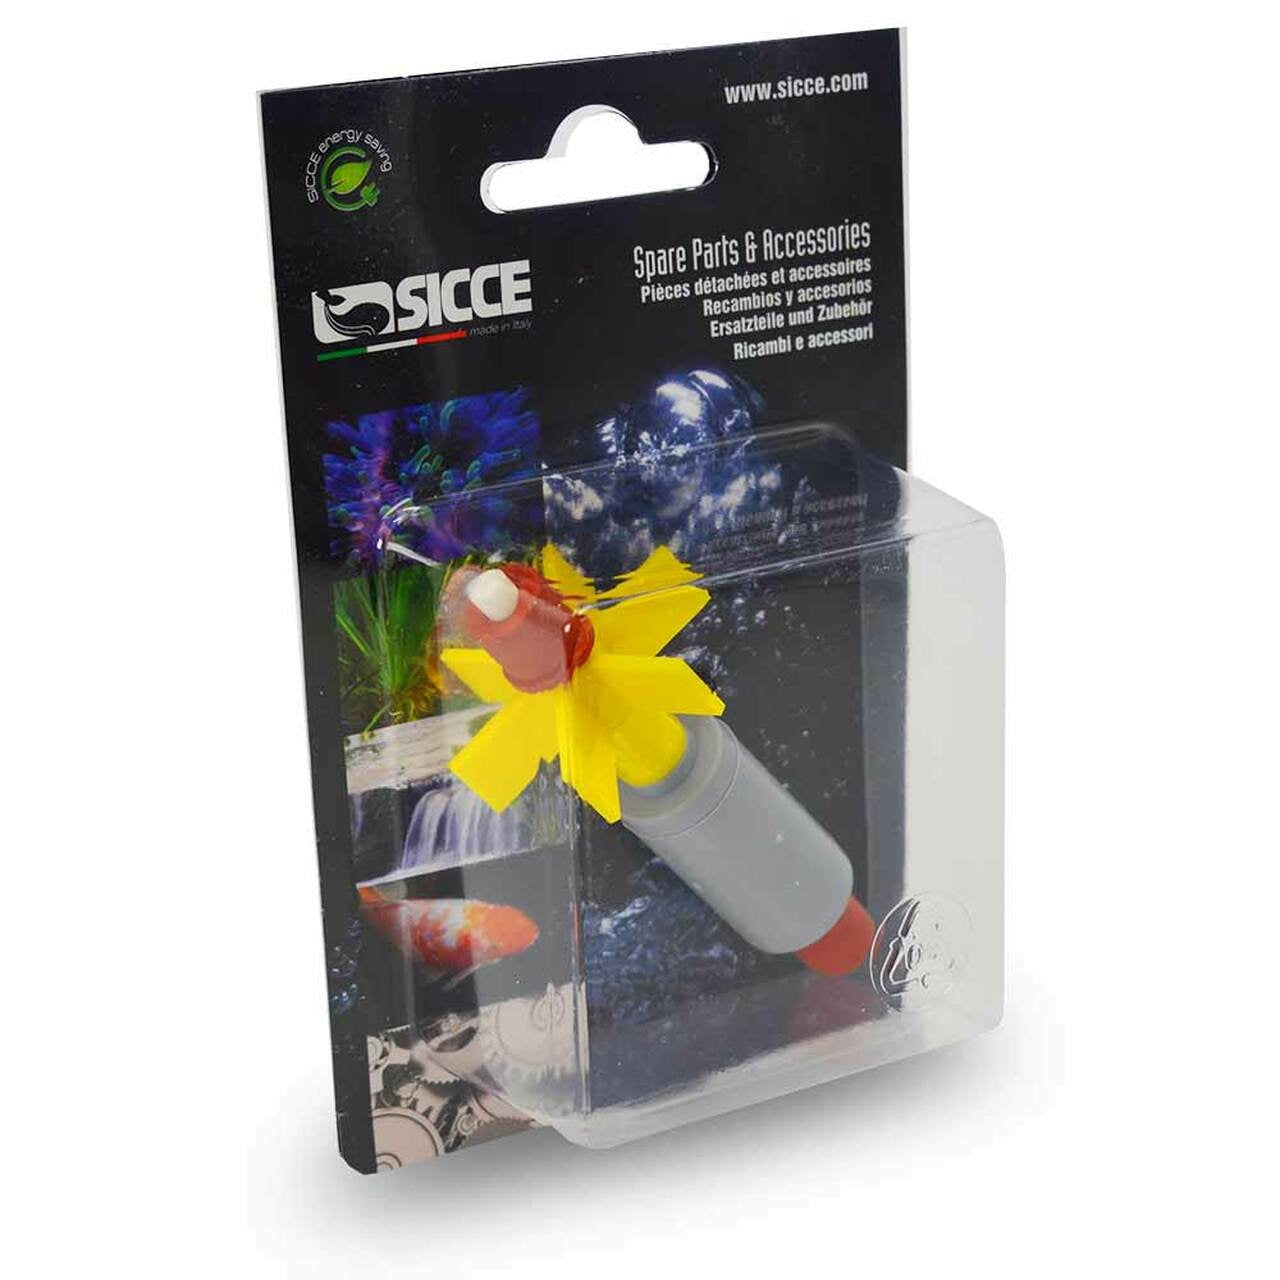 Sicce Replacement Impeller for Syncra 3.0